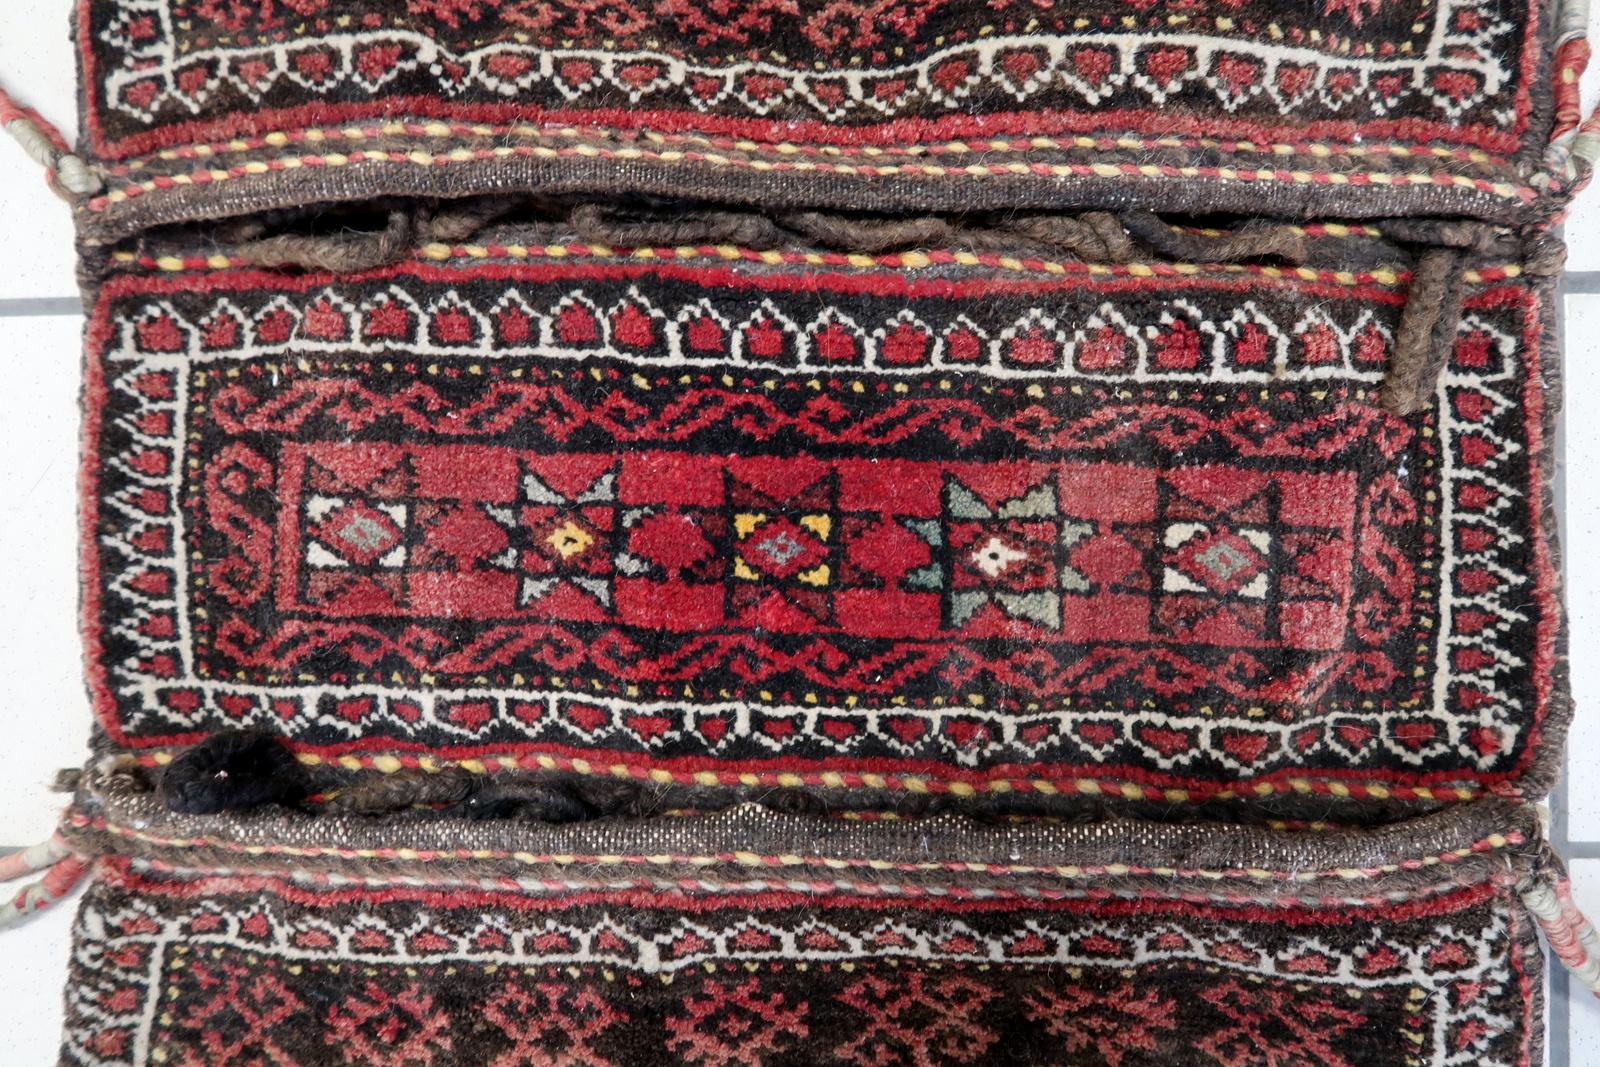 Hand-Knotted Handmade Antique Afghan Baluch Saddle Bag 1.6' x 3.8', 1930s - 1C1126 For Sale